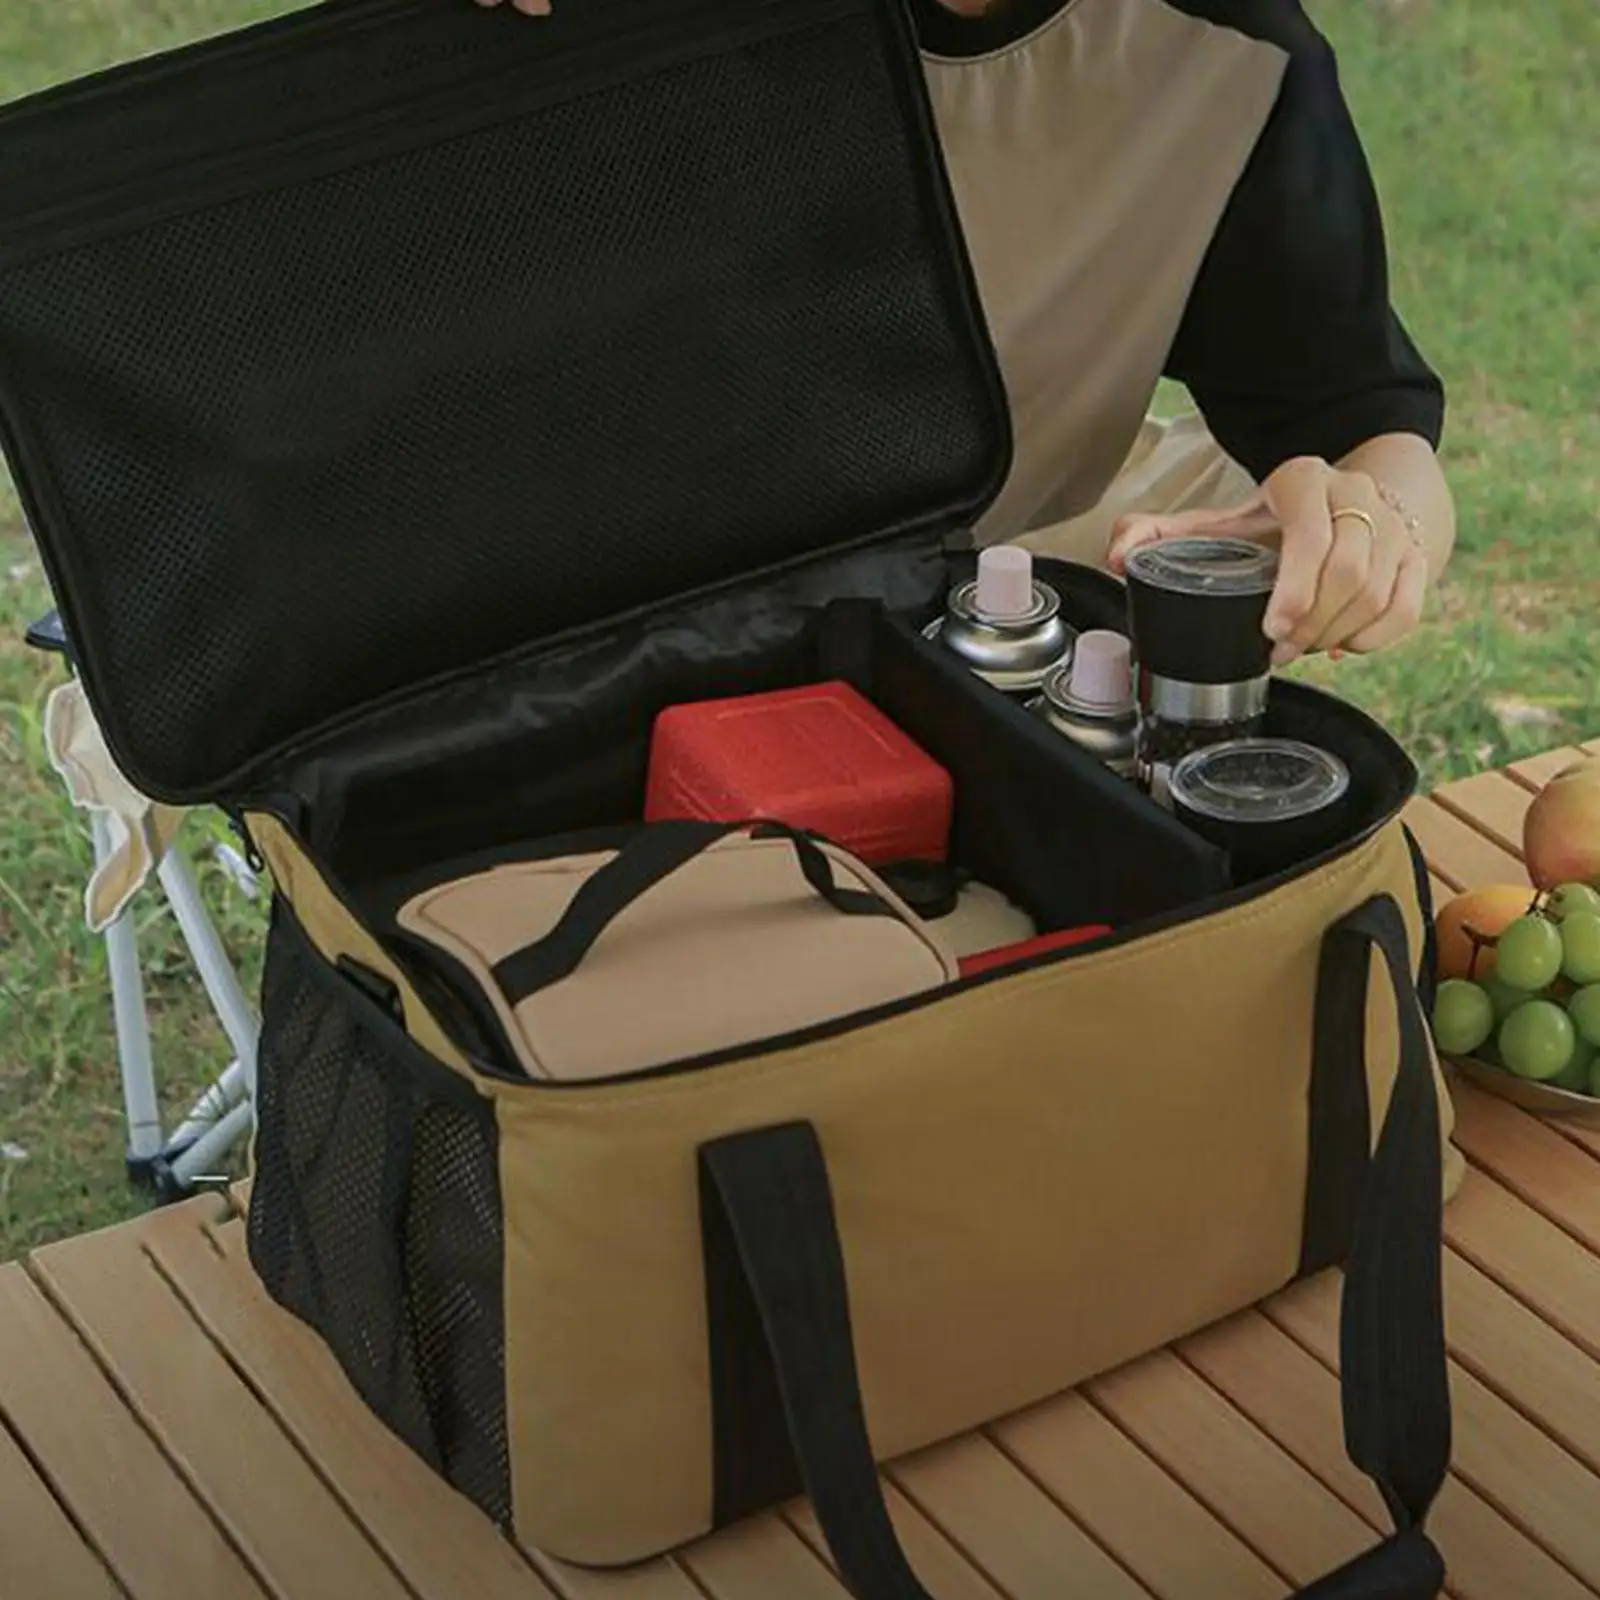 Large Capacity Camping Gas Tank Storage Bag Multifunctional Cookware Bag Tote Pouch Tableware Handbag for Barbecue BBQ Picnic